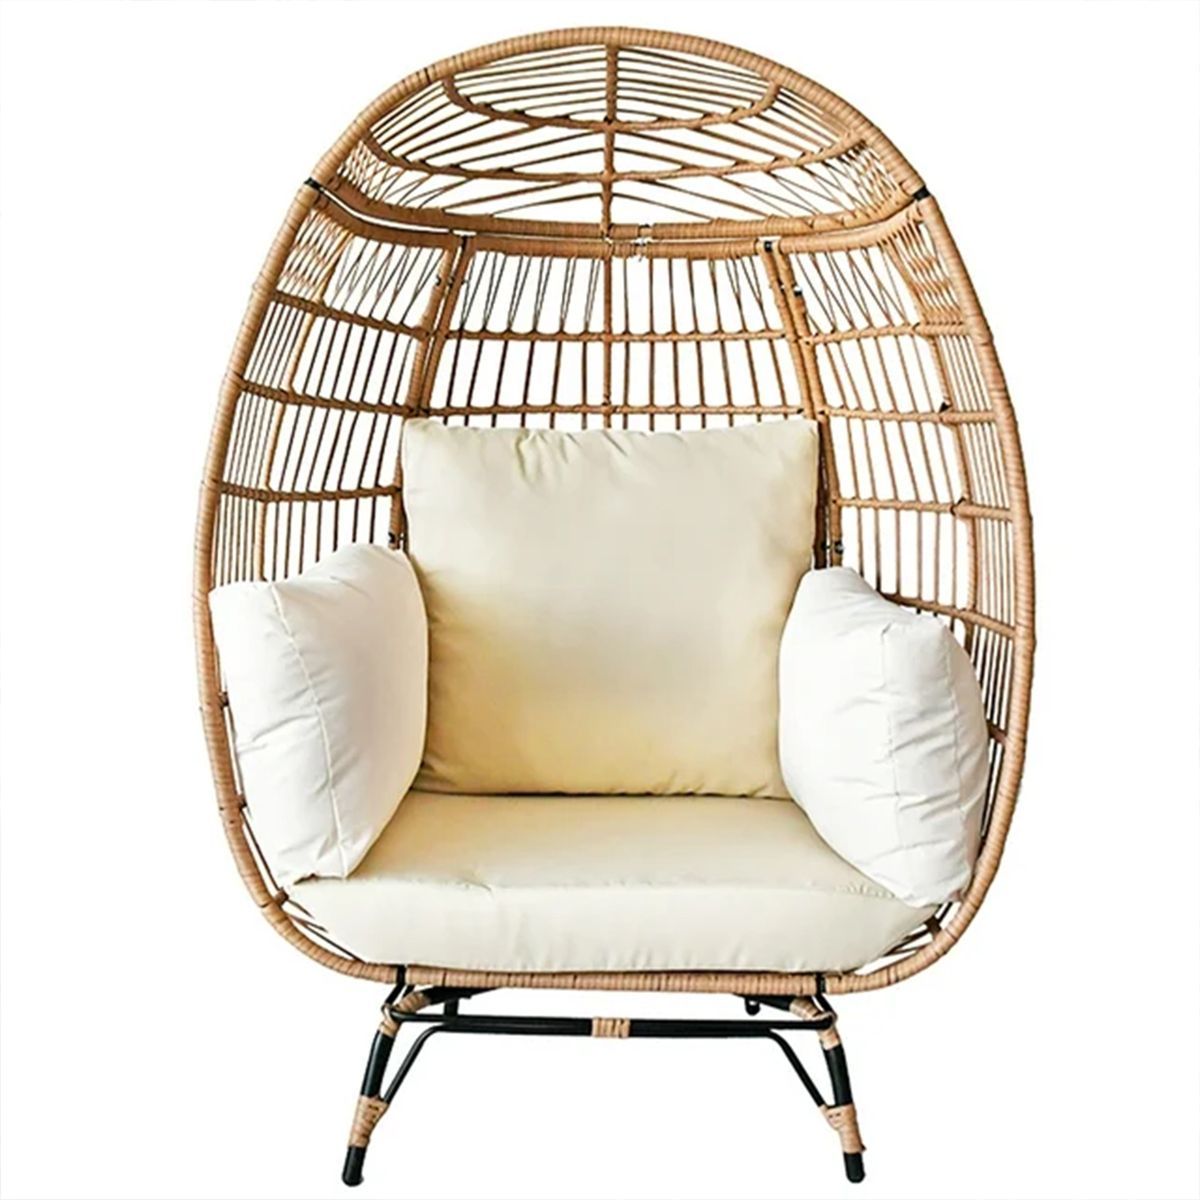 SKONYON Wicker Egg Chair Oversized Indoor Outdoor Patio Lounger with Steel Frame, 440lb Capacity | Target